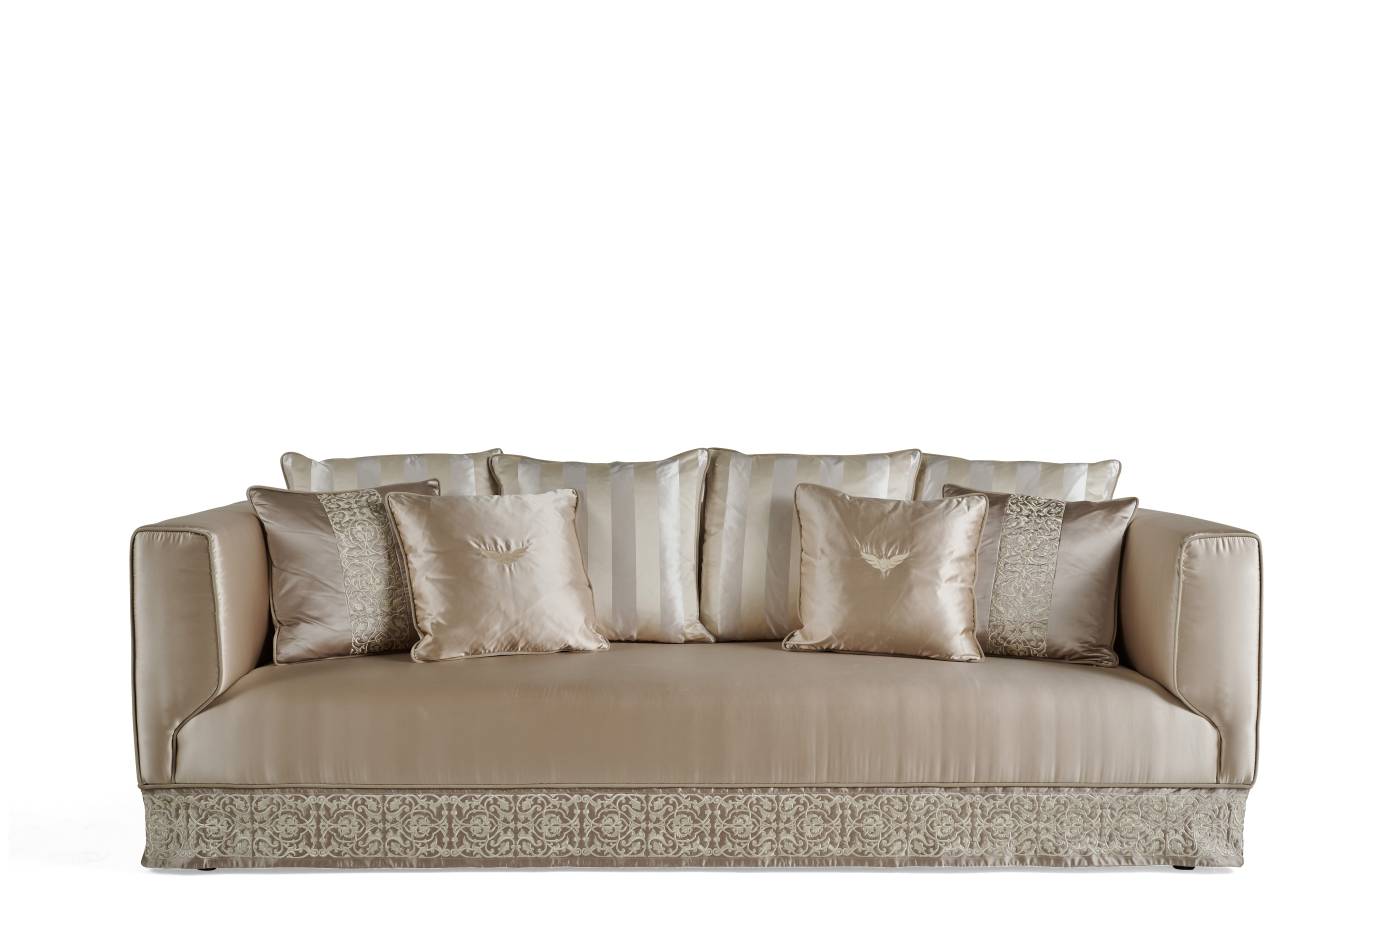 BRODERIE 3-seater sofa - Discover the elegance of luxury Héritage collection by Jumbo collection